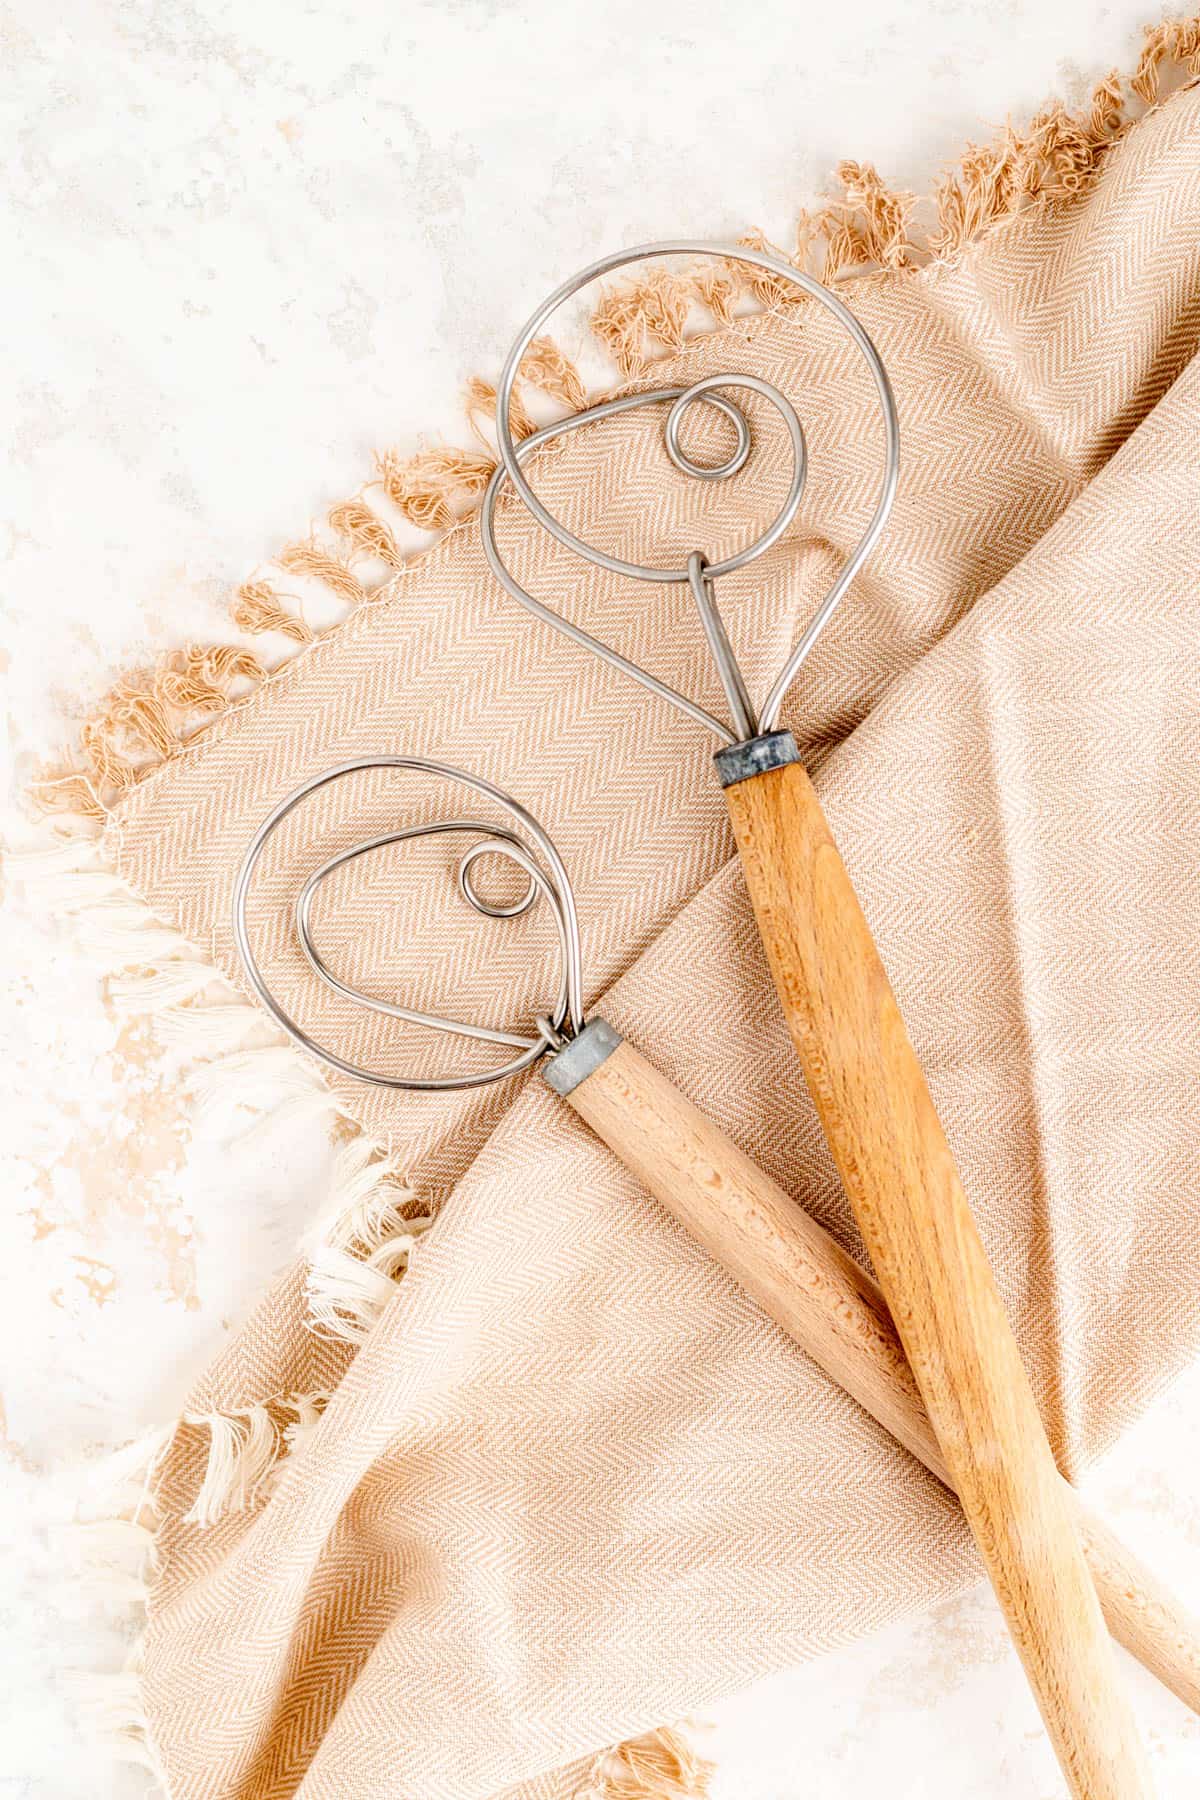 a small and large dough whisk on a brown towel